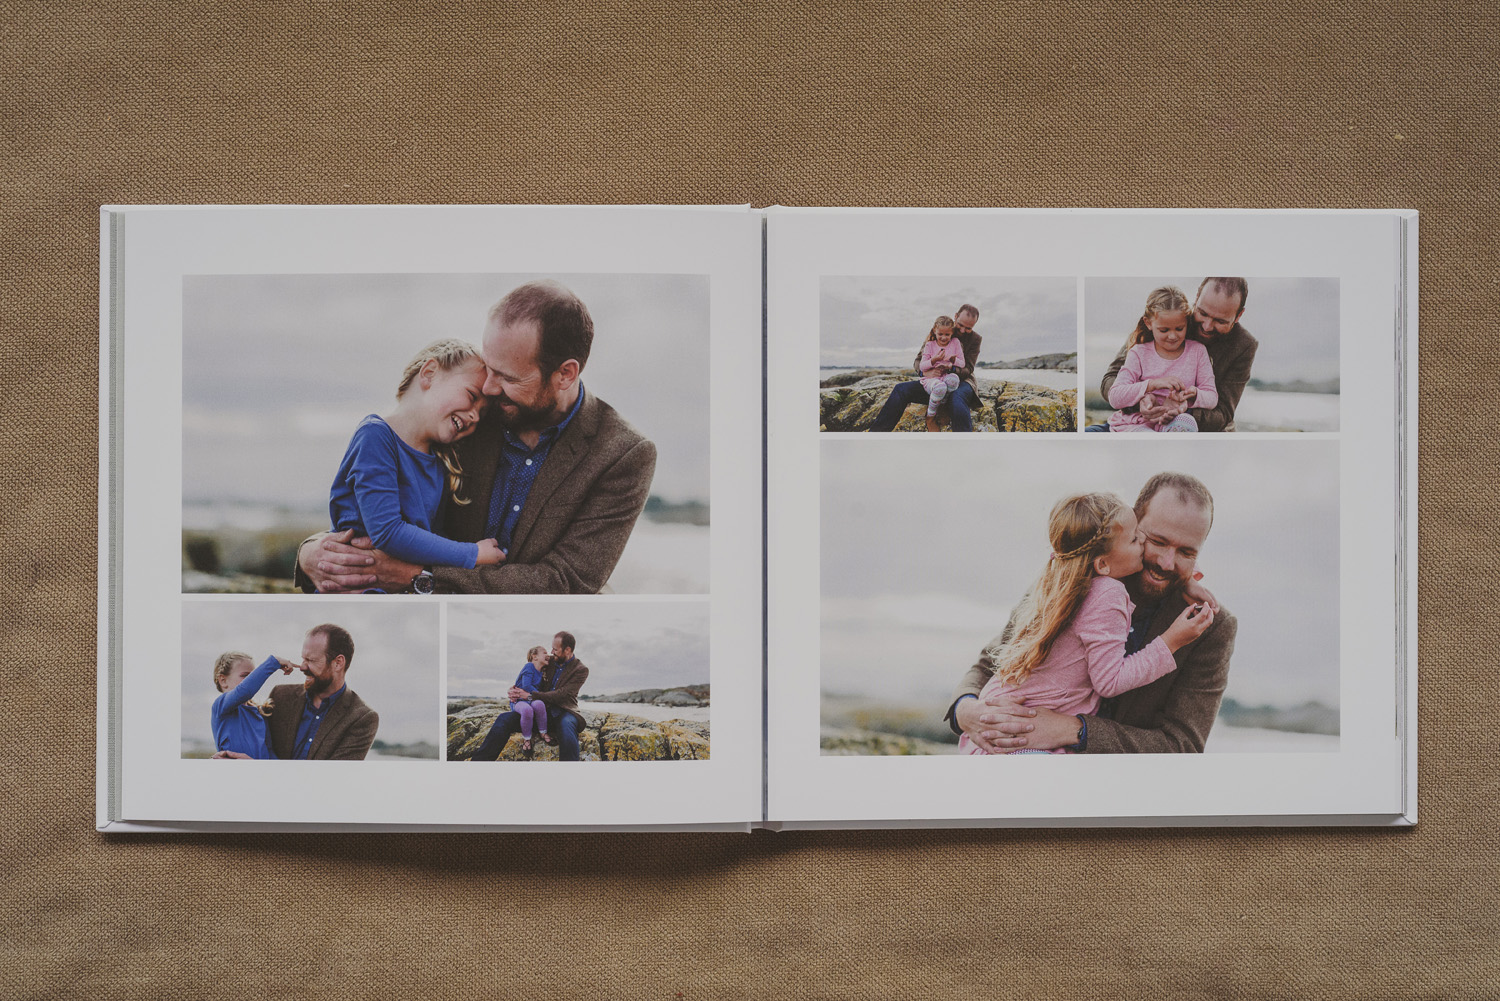 beautiful family photo book-dad snuggling young daughter at beach